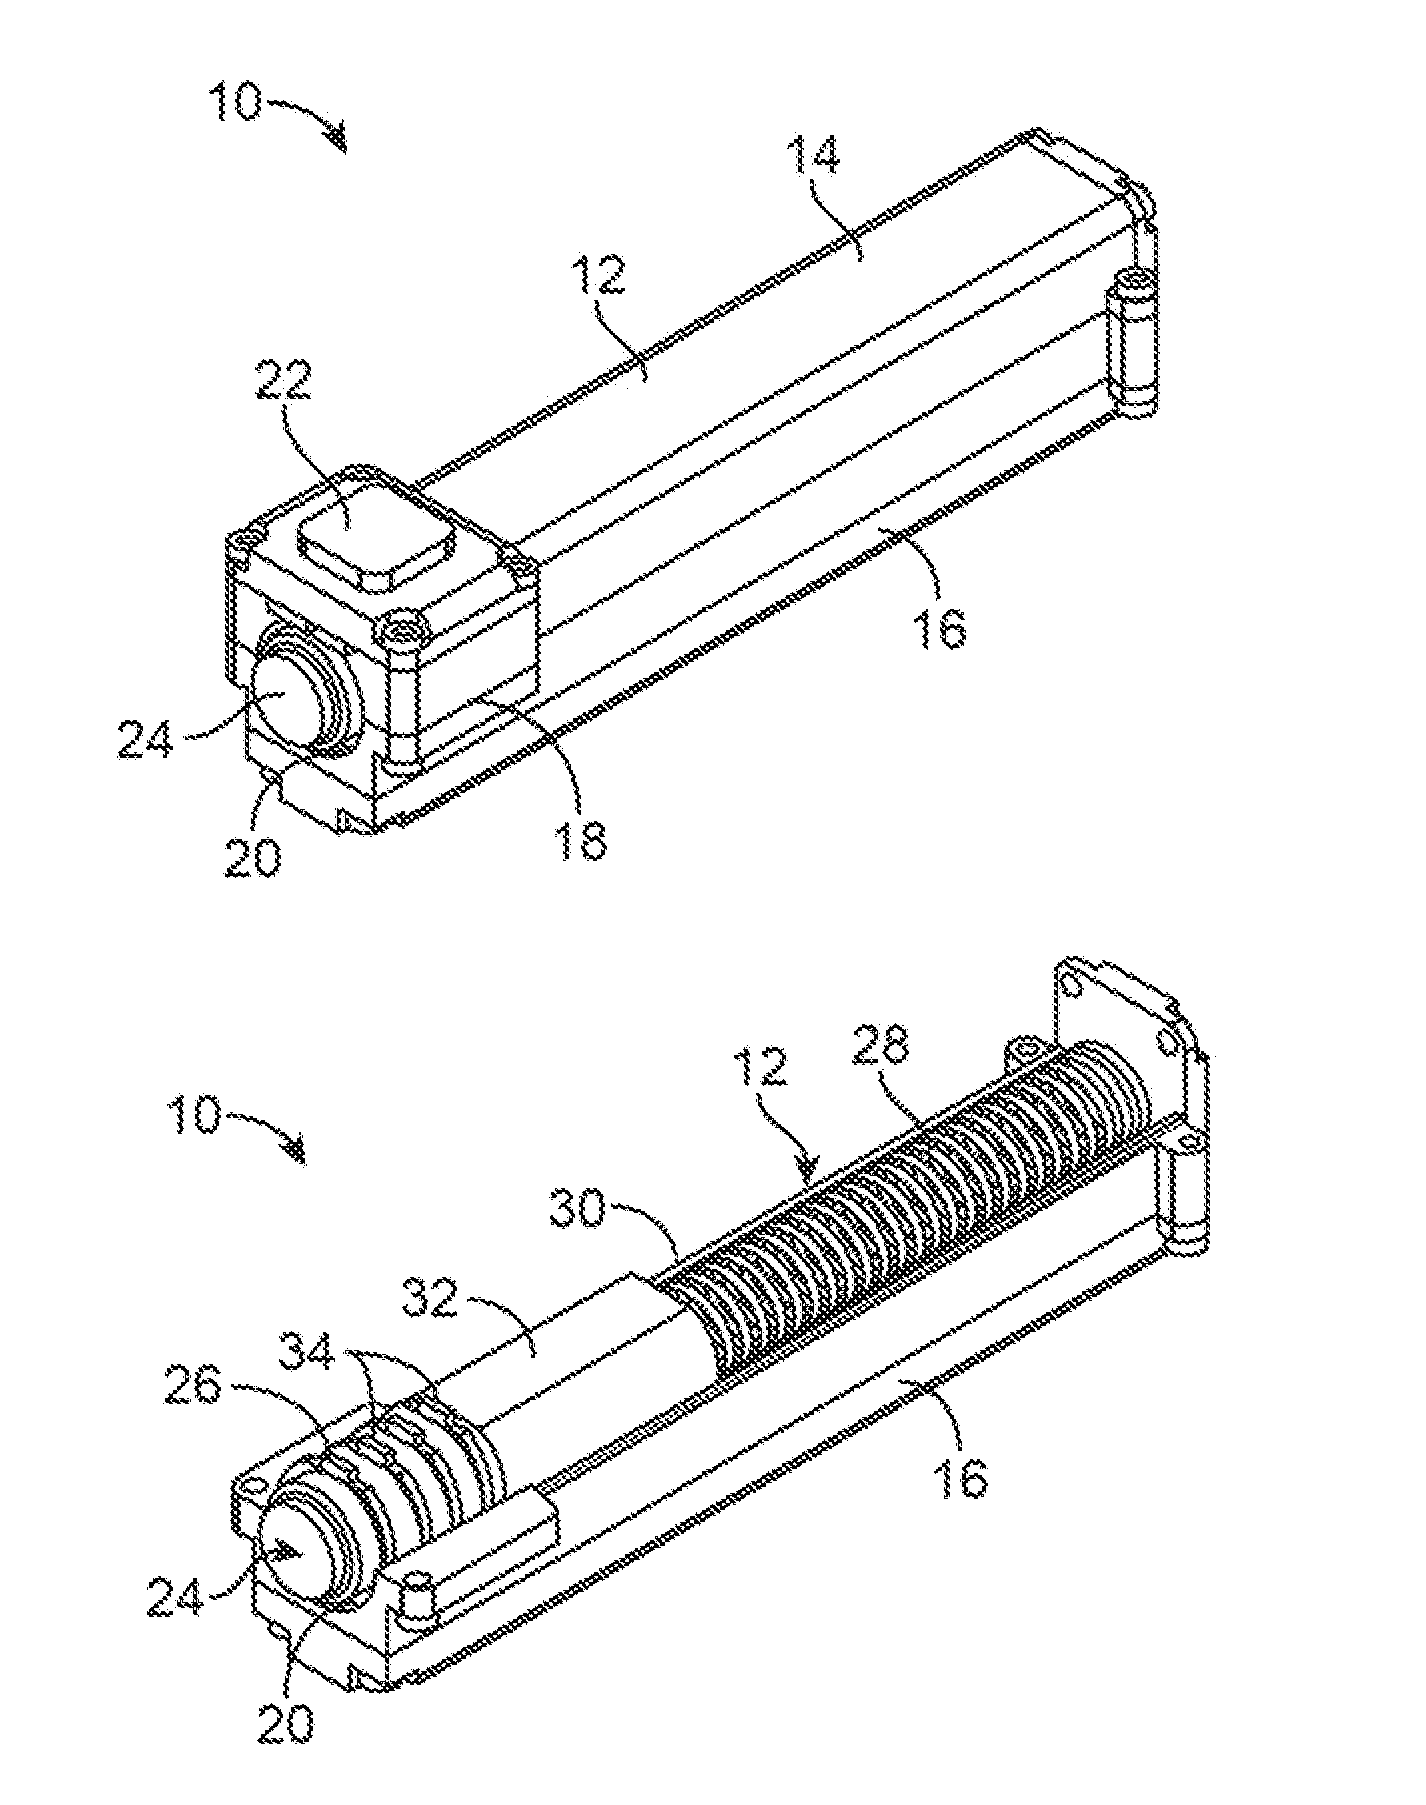 Sterilization assembly and methods of use